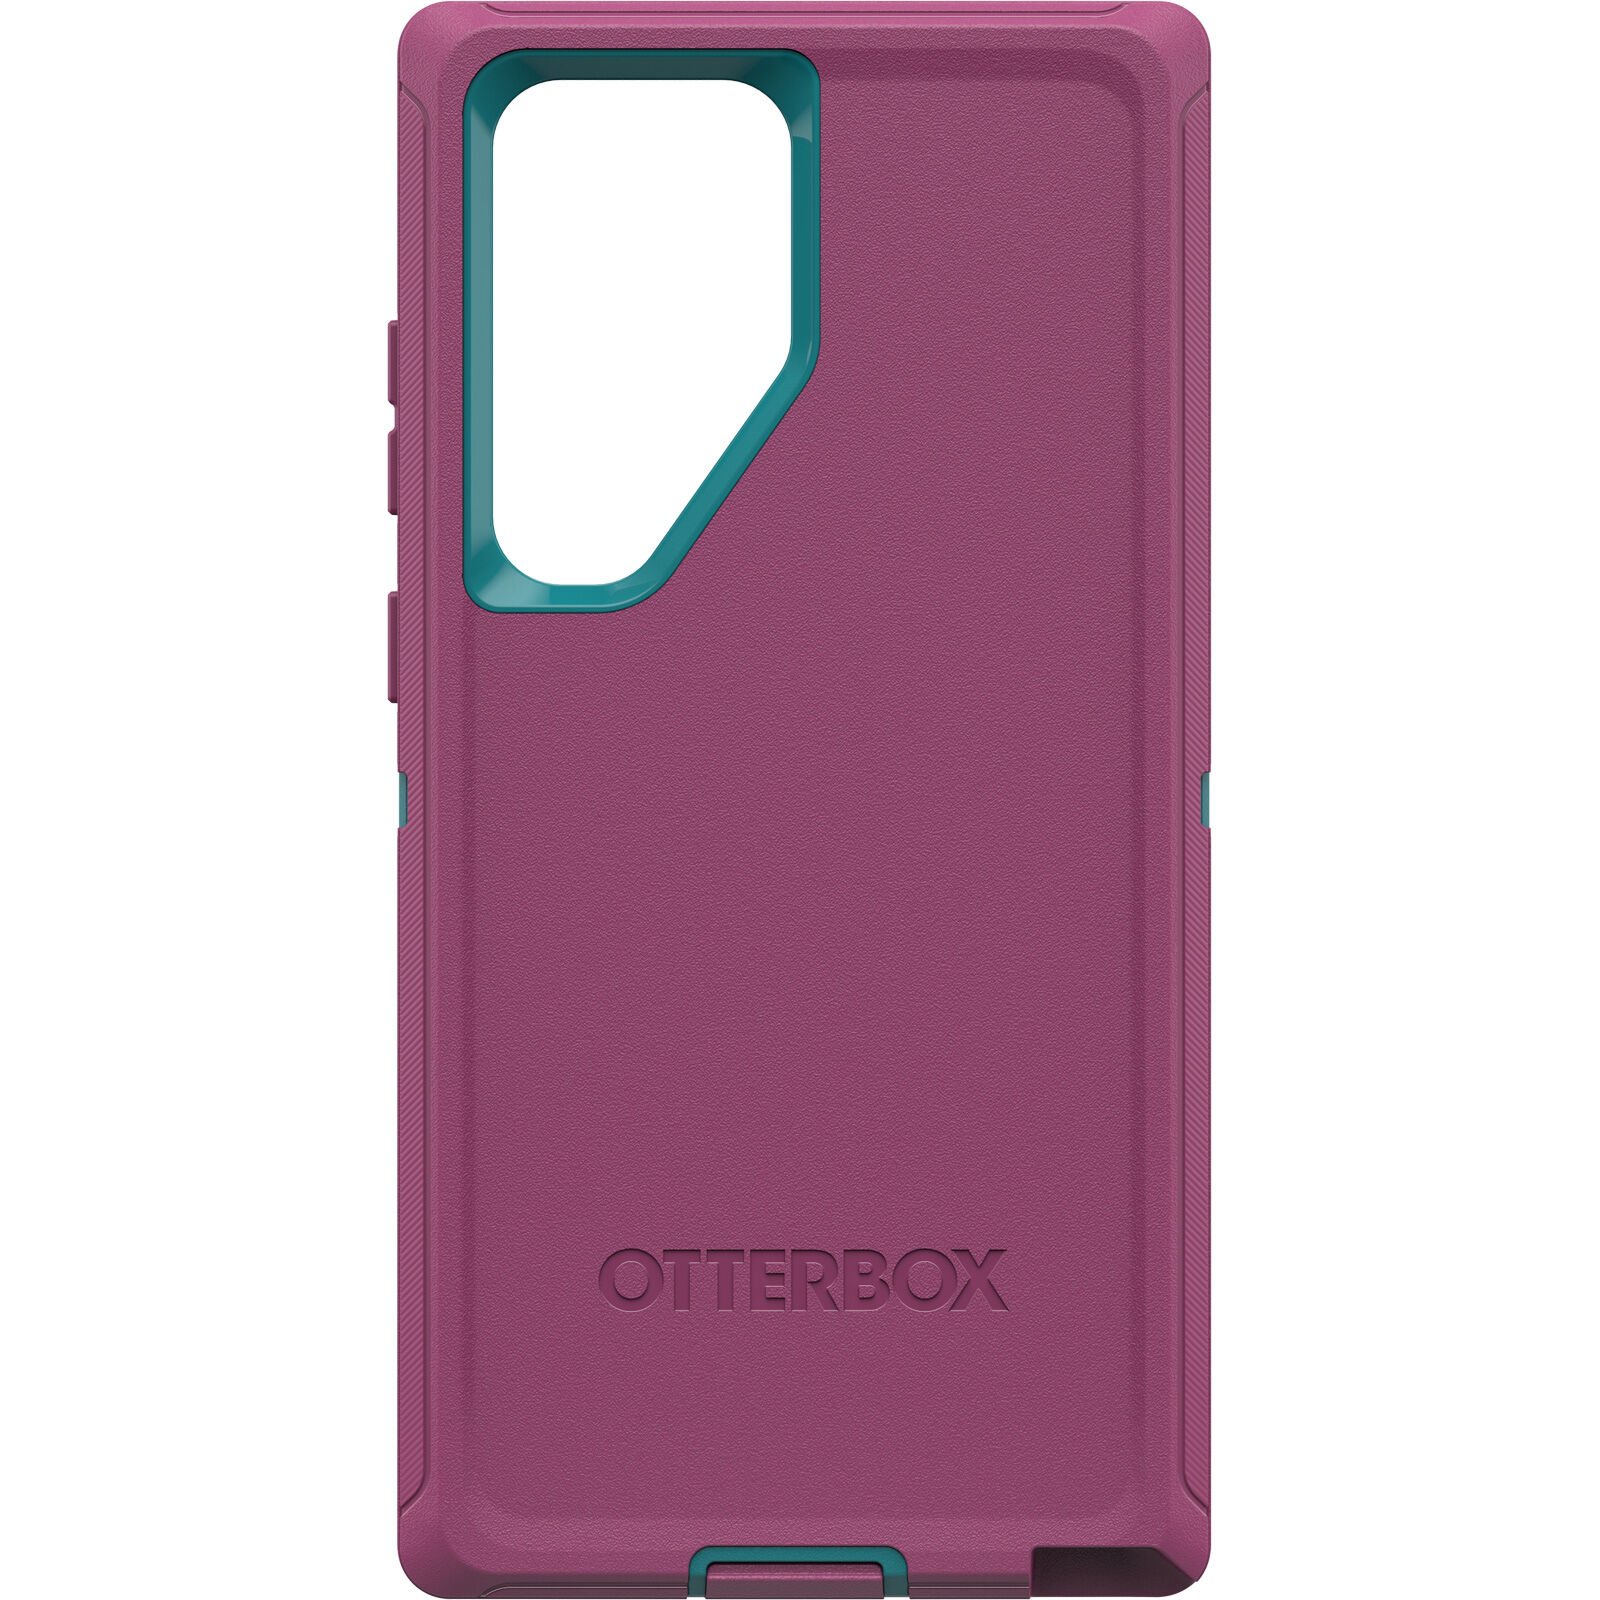 OtterBox Carrying Case Apple AirPods Pro - Strawberry Shortcake (Pink)